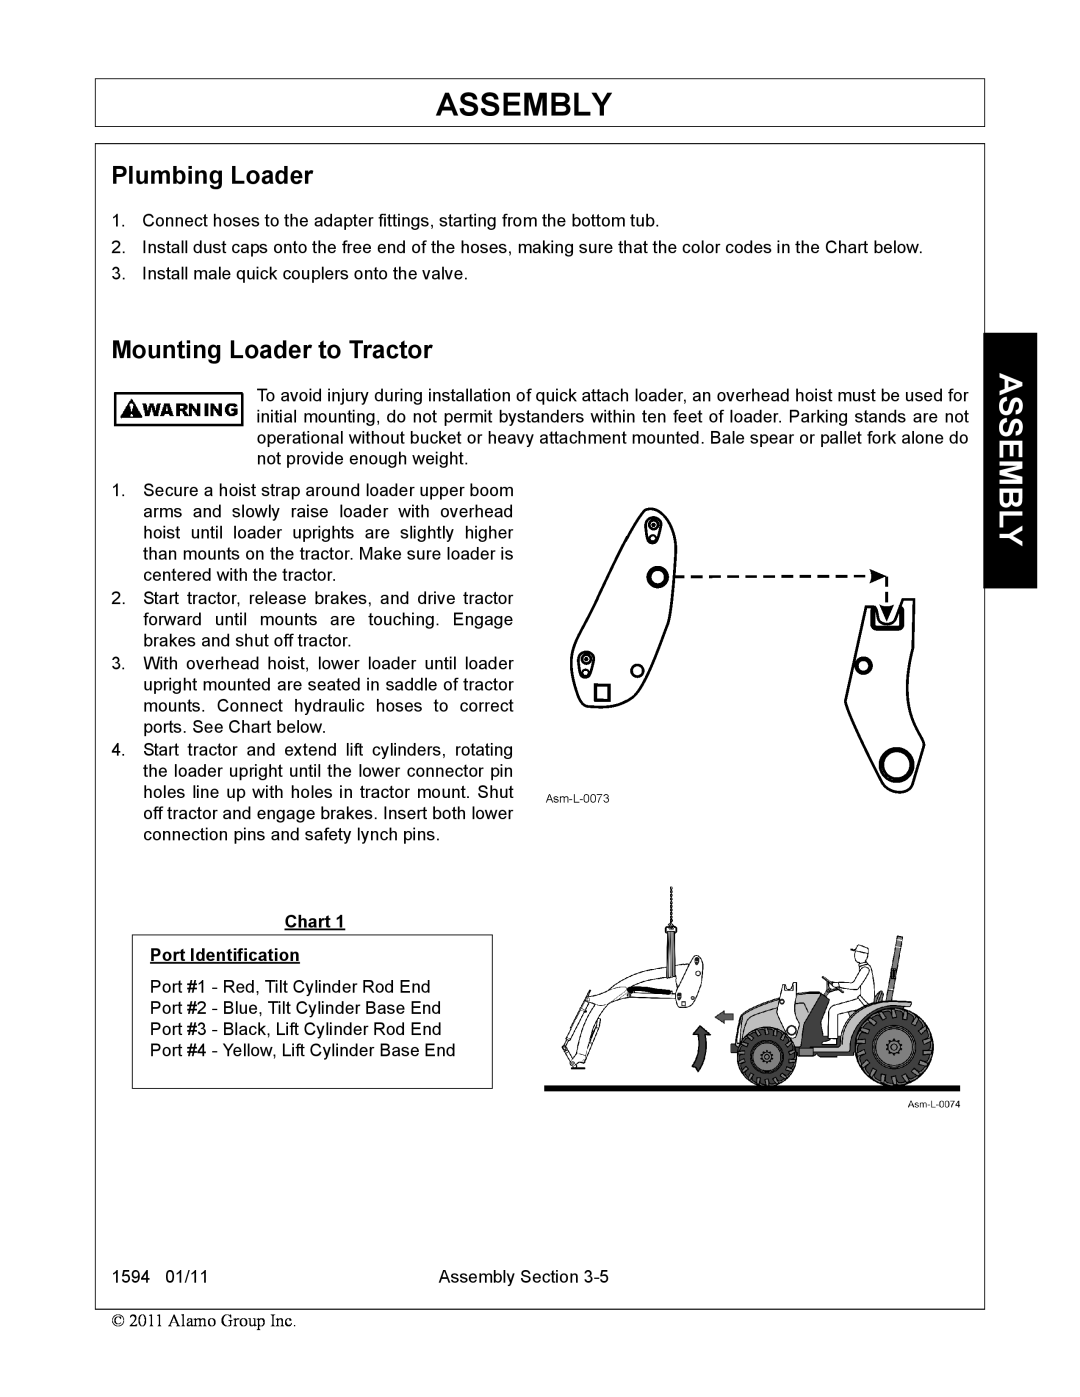 Rhino Mounts 1594 manual Assembly, Plumbing Loader, Mounting Loader to Tractor, Chart Port Identification 